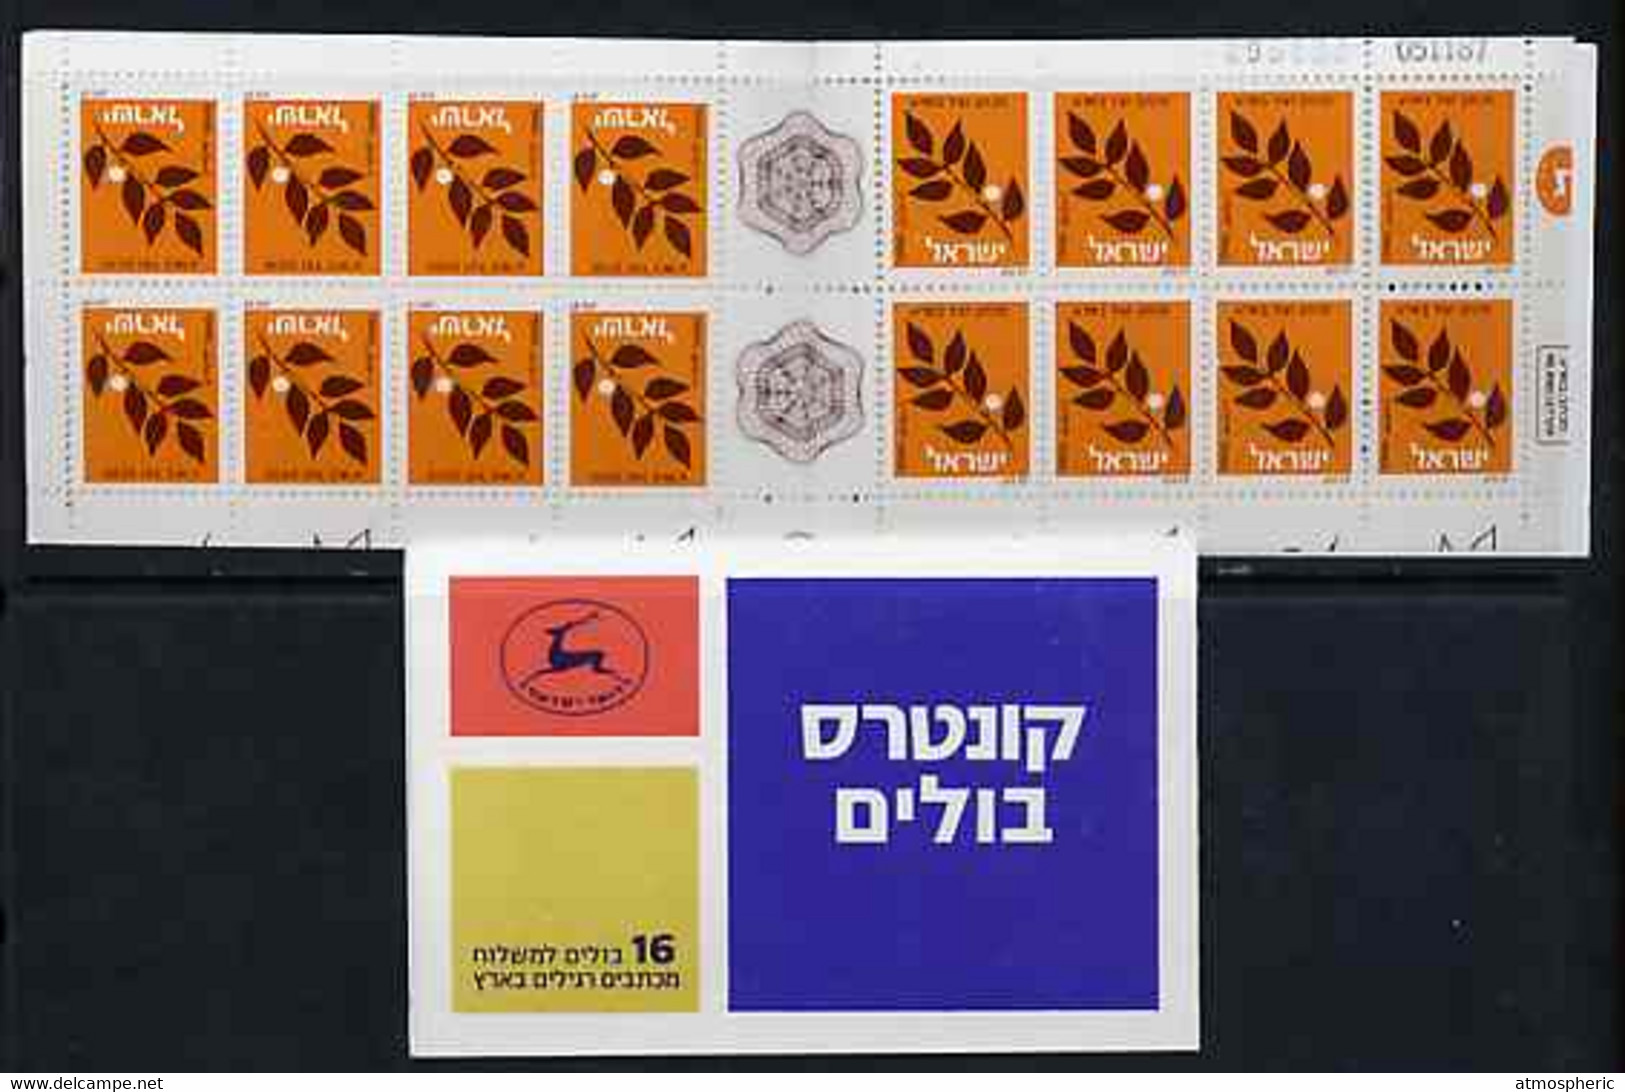 Booklet - Israel 1984-91 Branch (undenominated) Booklet (tete-beche Pane With Bright Ult Cover) Complete And Pristine, S - Carnets